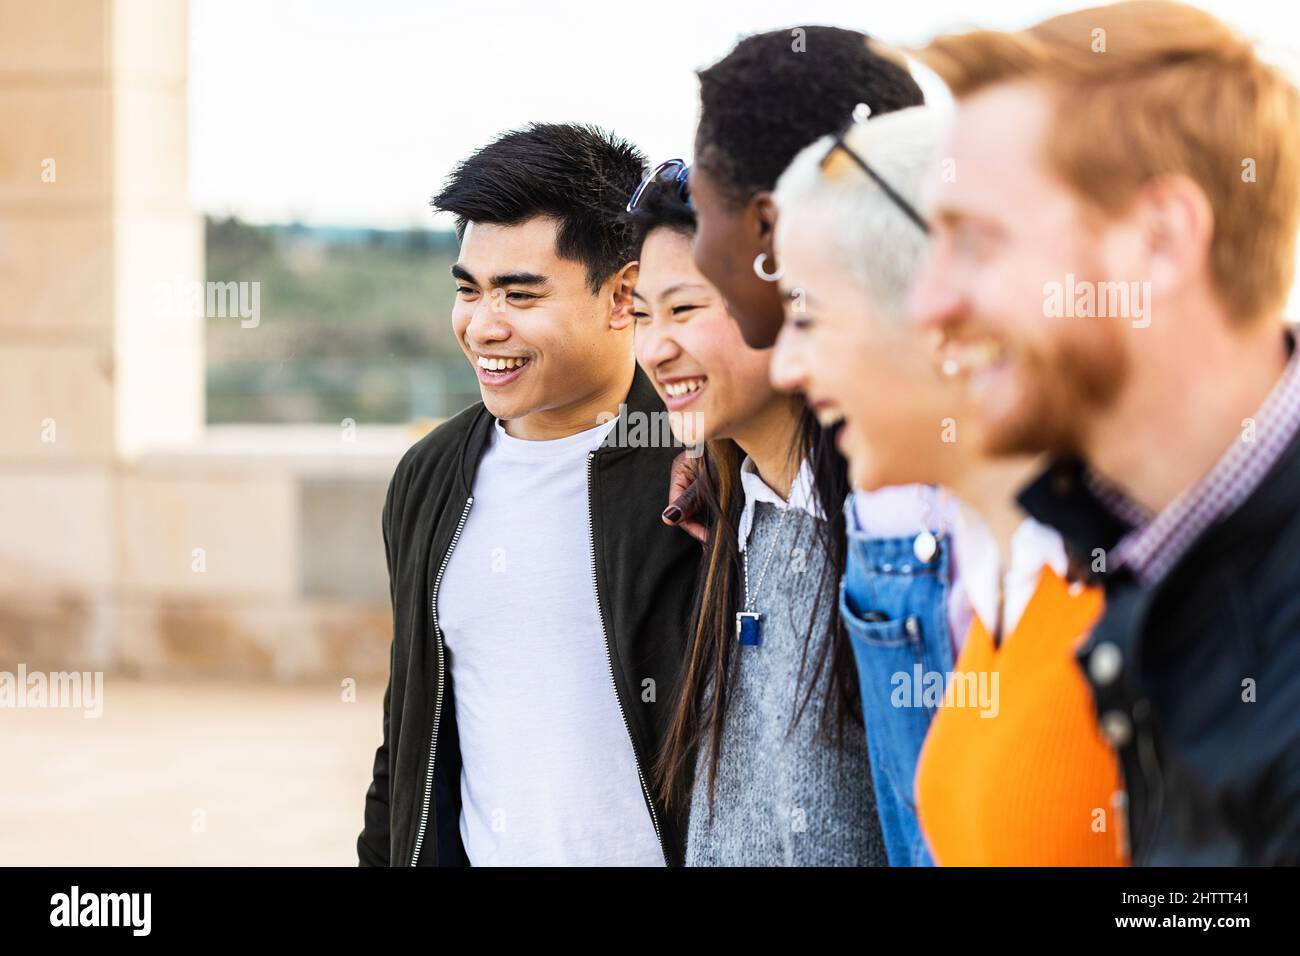 Diverse group of united young friends laughing together outdoor Stock Photo